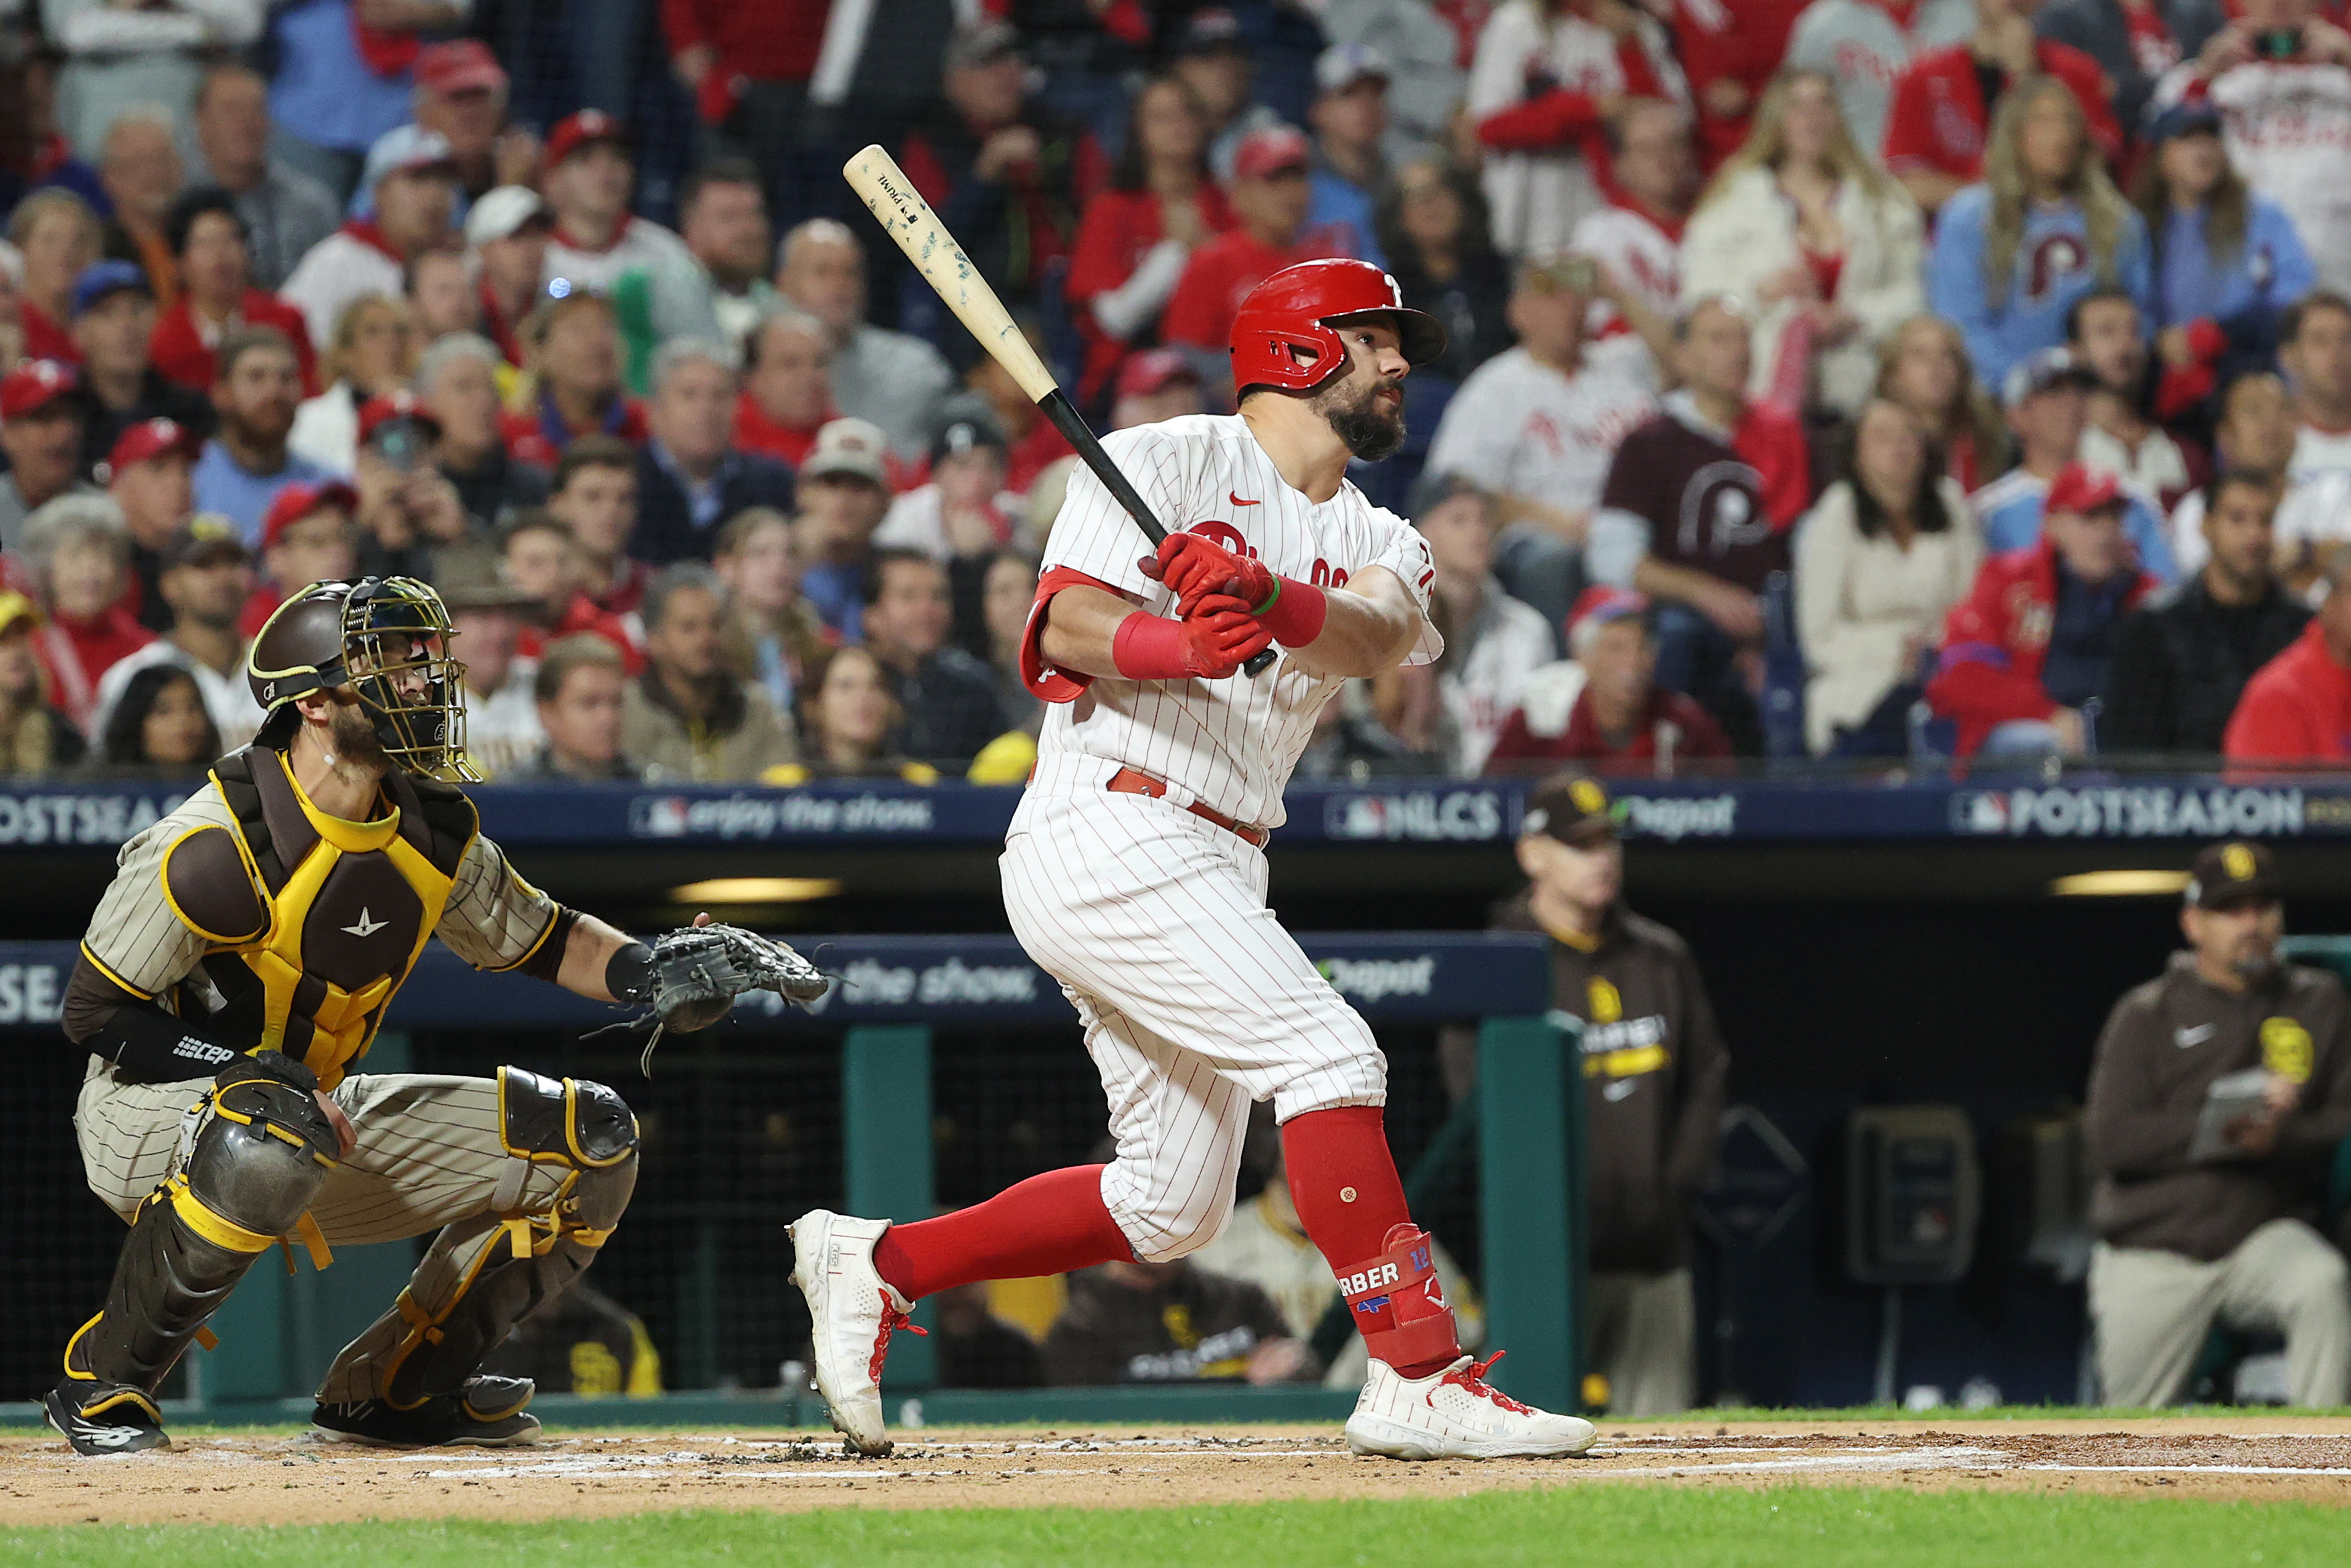 Kyle Schwarber's leadoff homer, Segura's redemption send the Phillies past  past the Padres for a pivotal Game 3 win - The Boston Globe